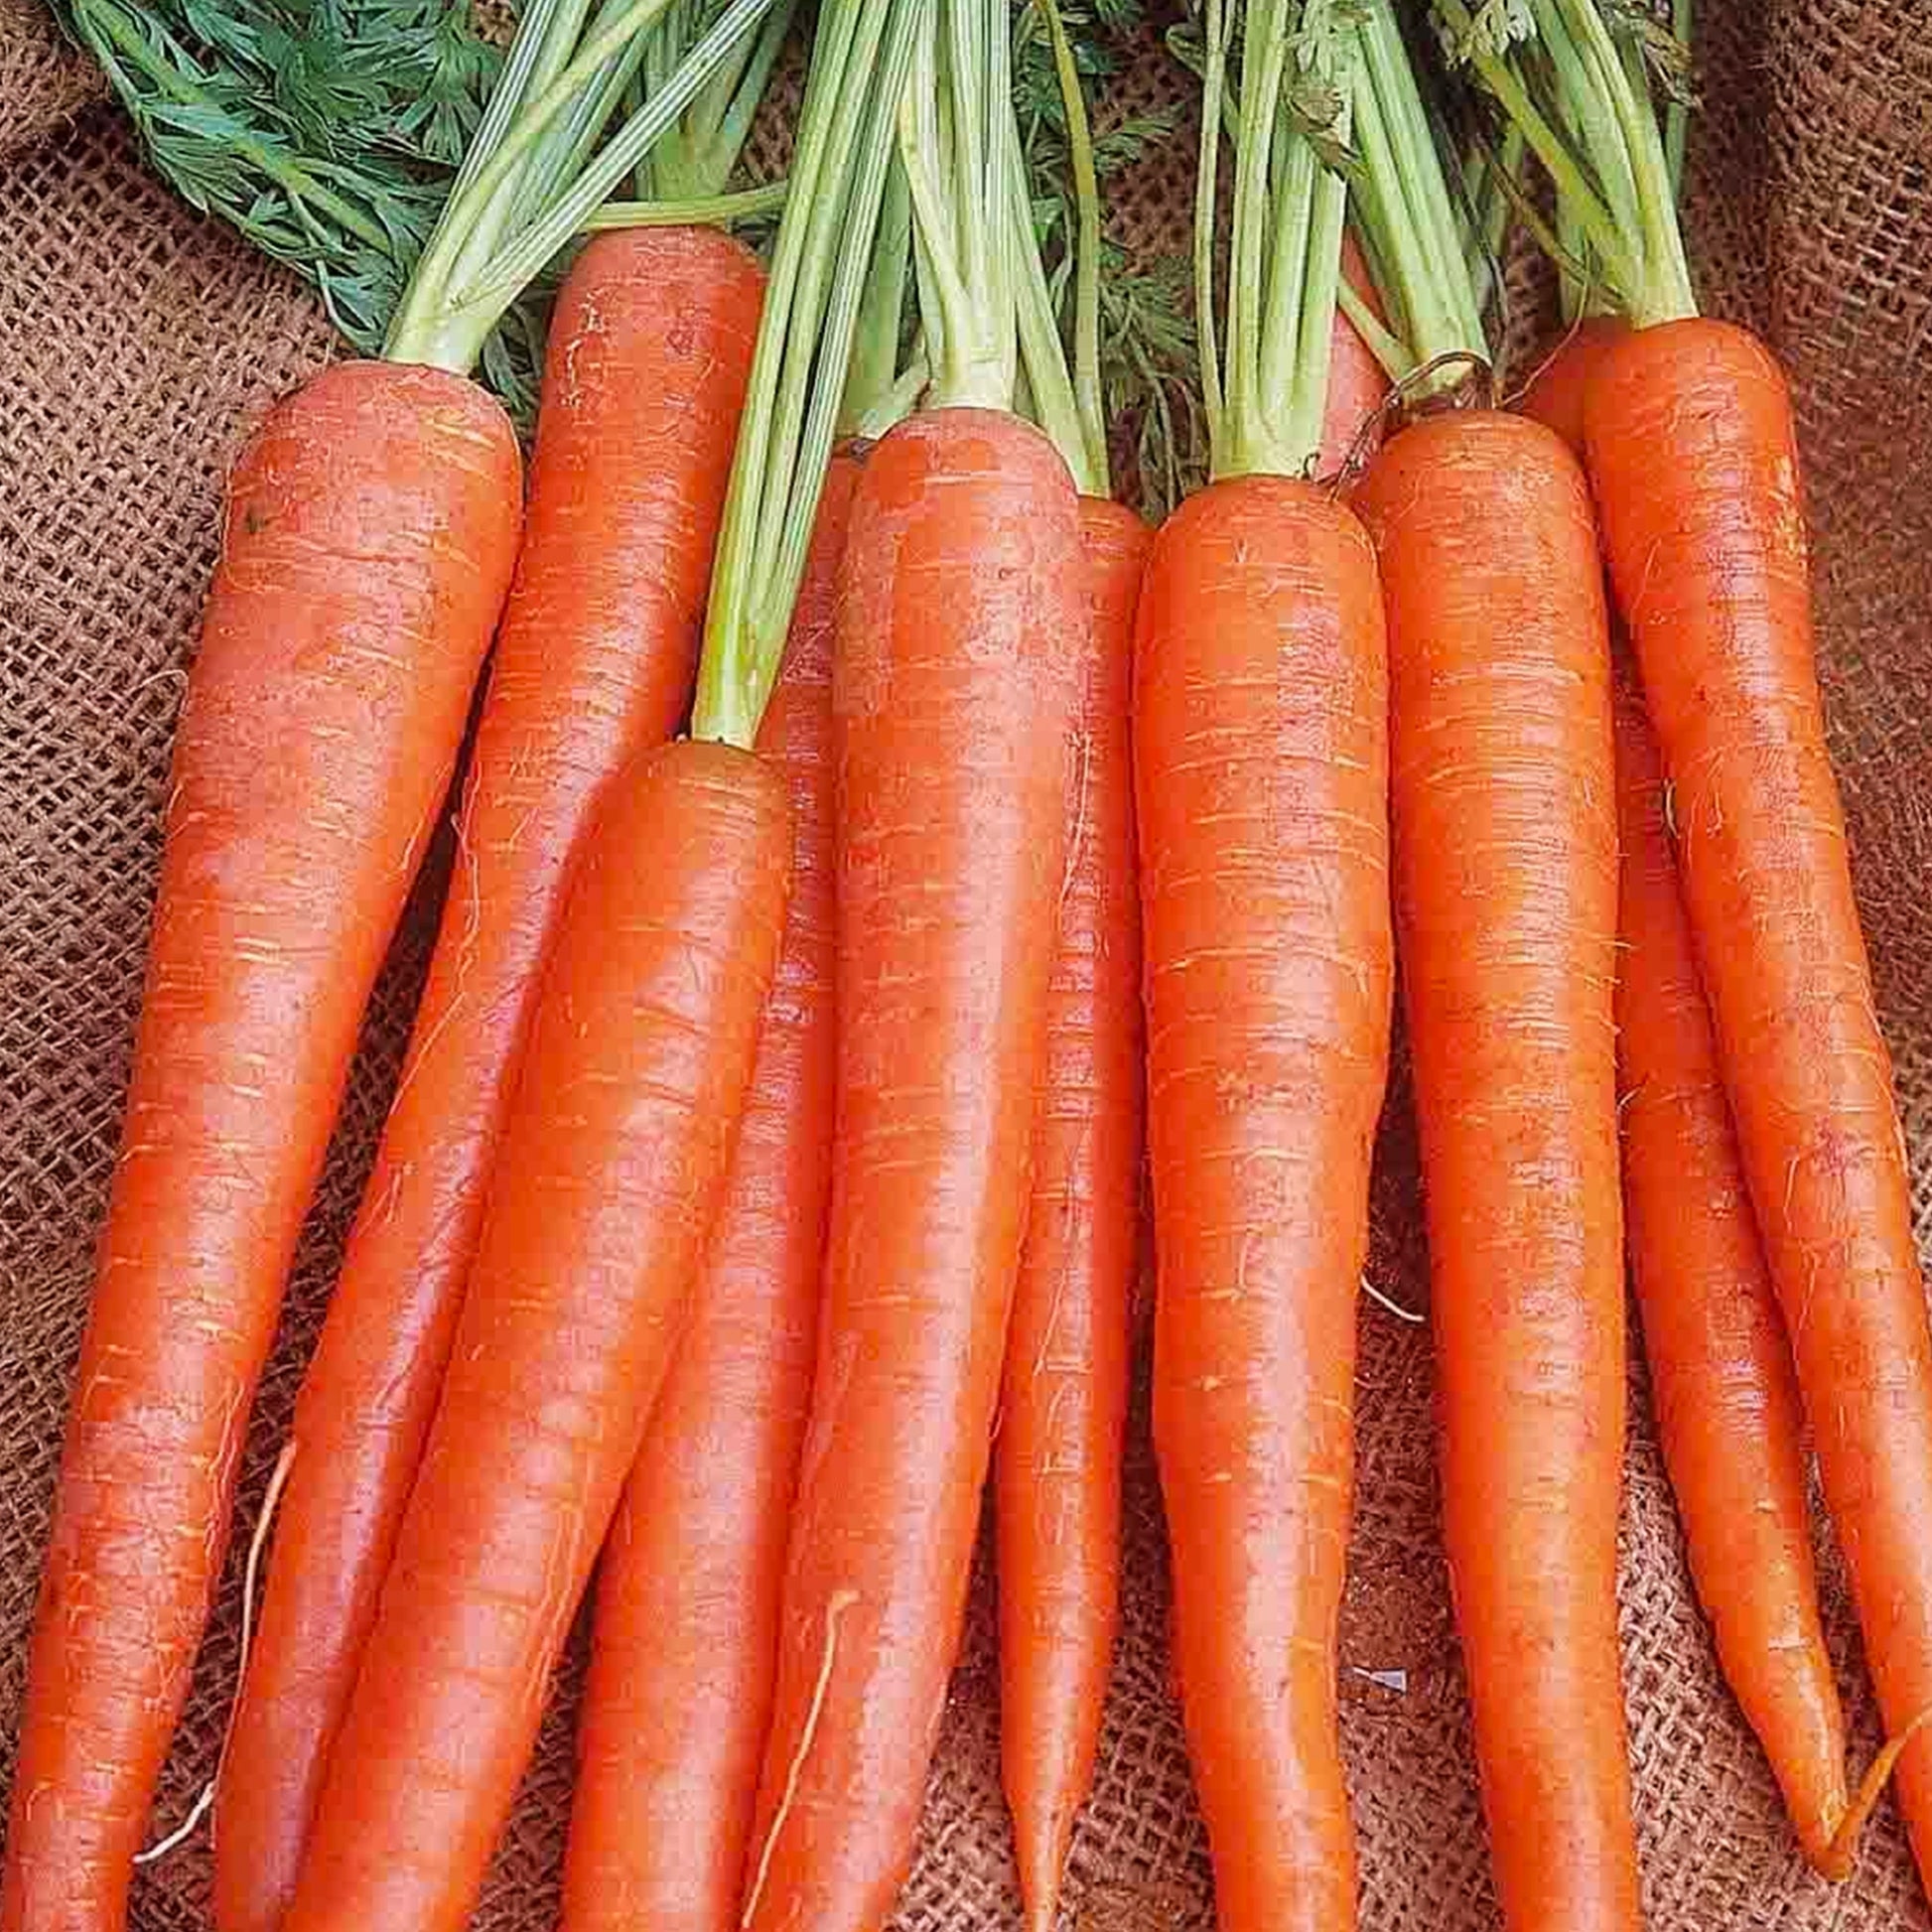 Long Imperator #58 Carrot Seeds matured and harvested from Ferry-Morse